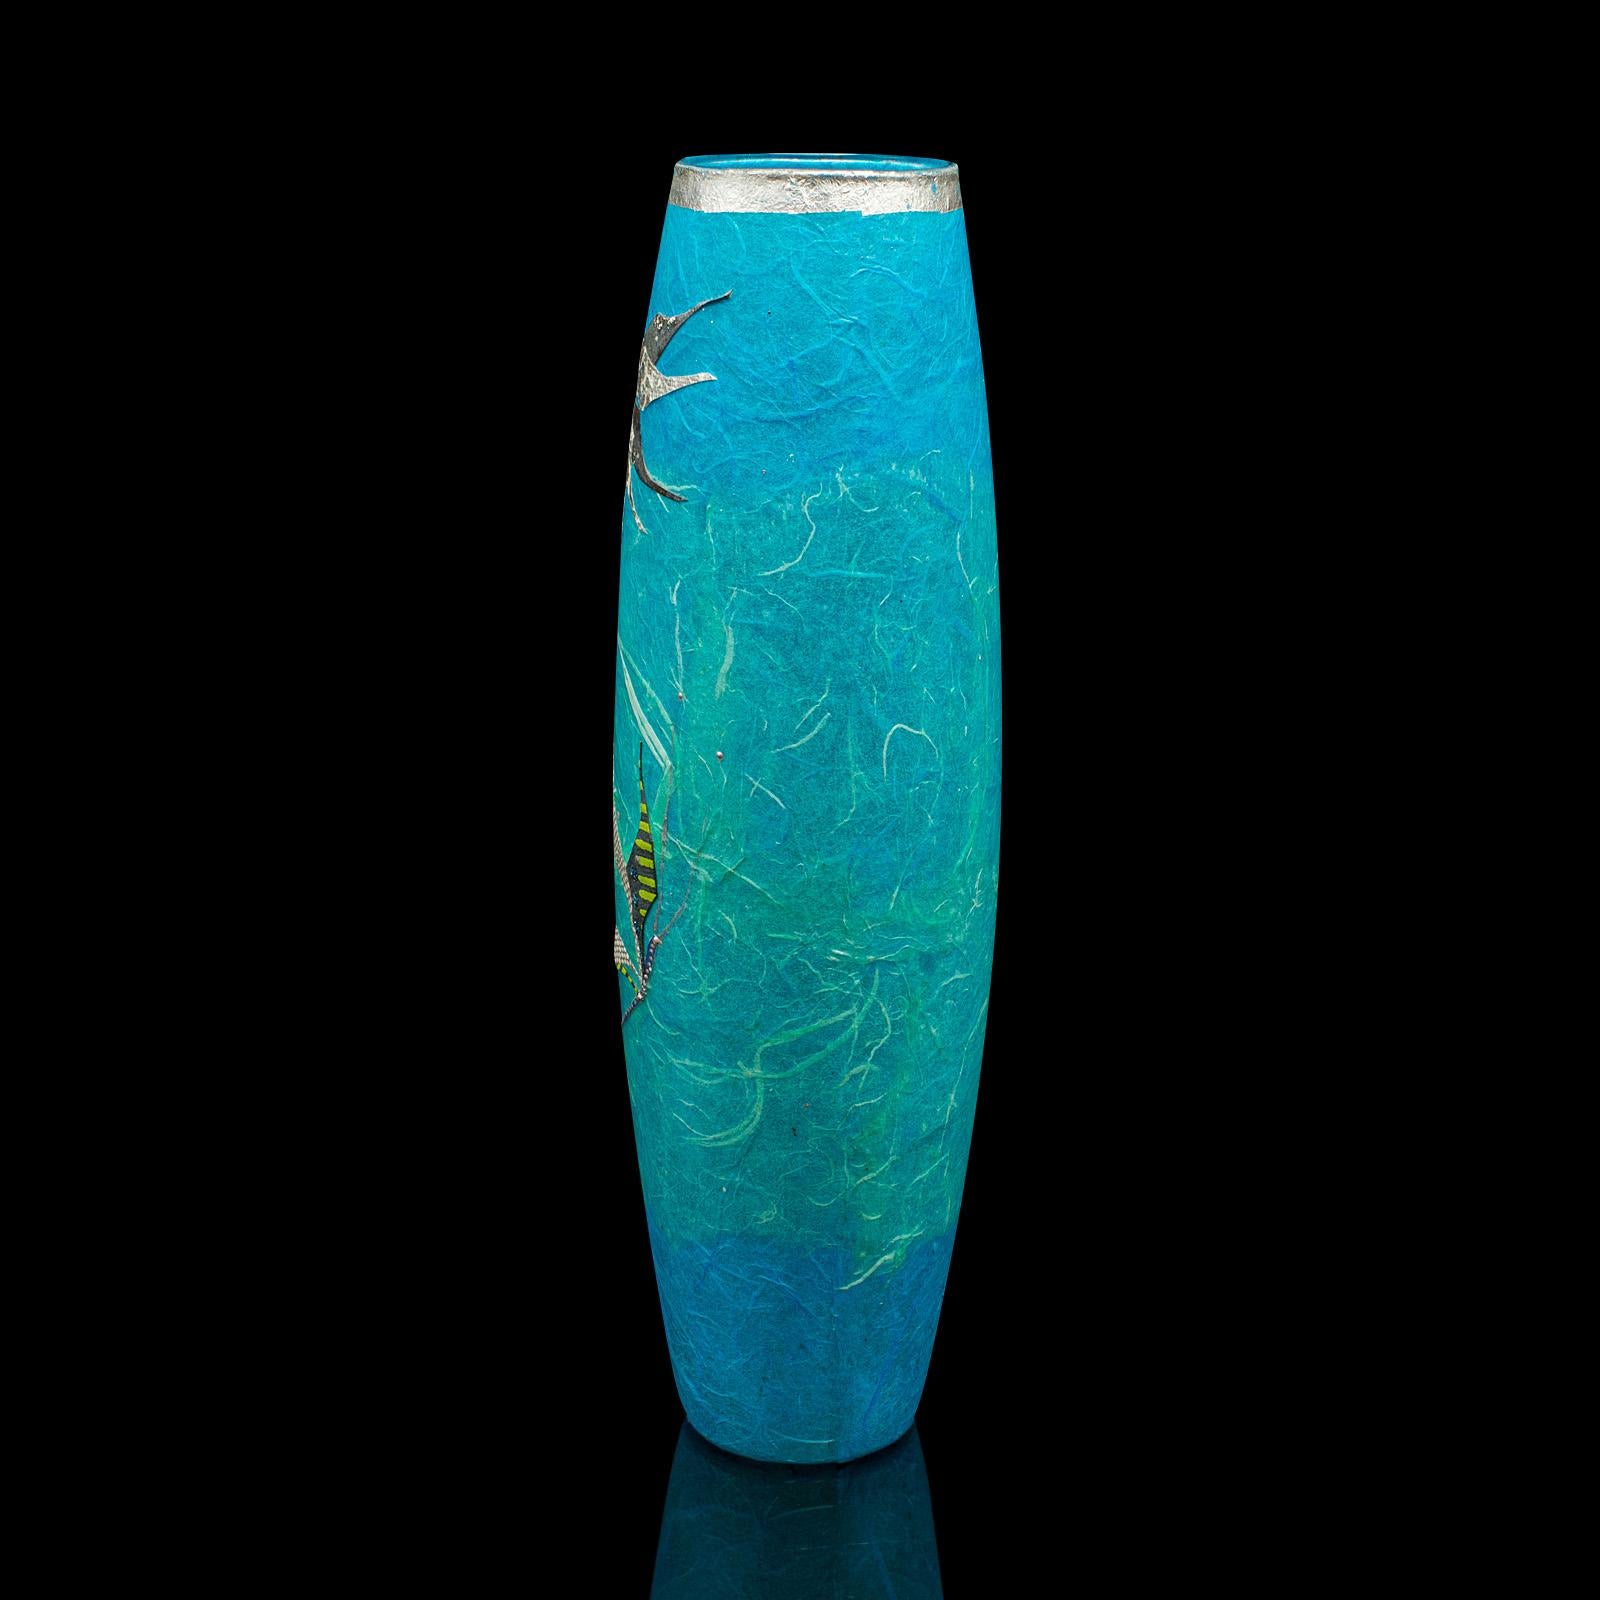 Tall Contemporary Decorative Flower Sleeve, English, Art Glass, Straw Silk Vase In Good Condition For Sale In Hele, Devon, GB